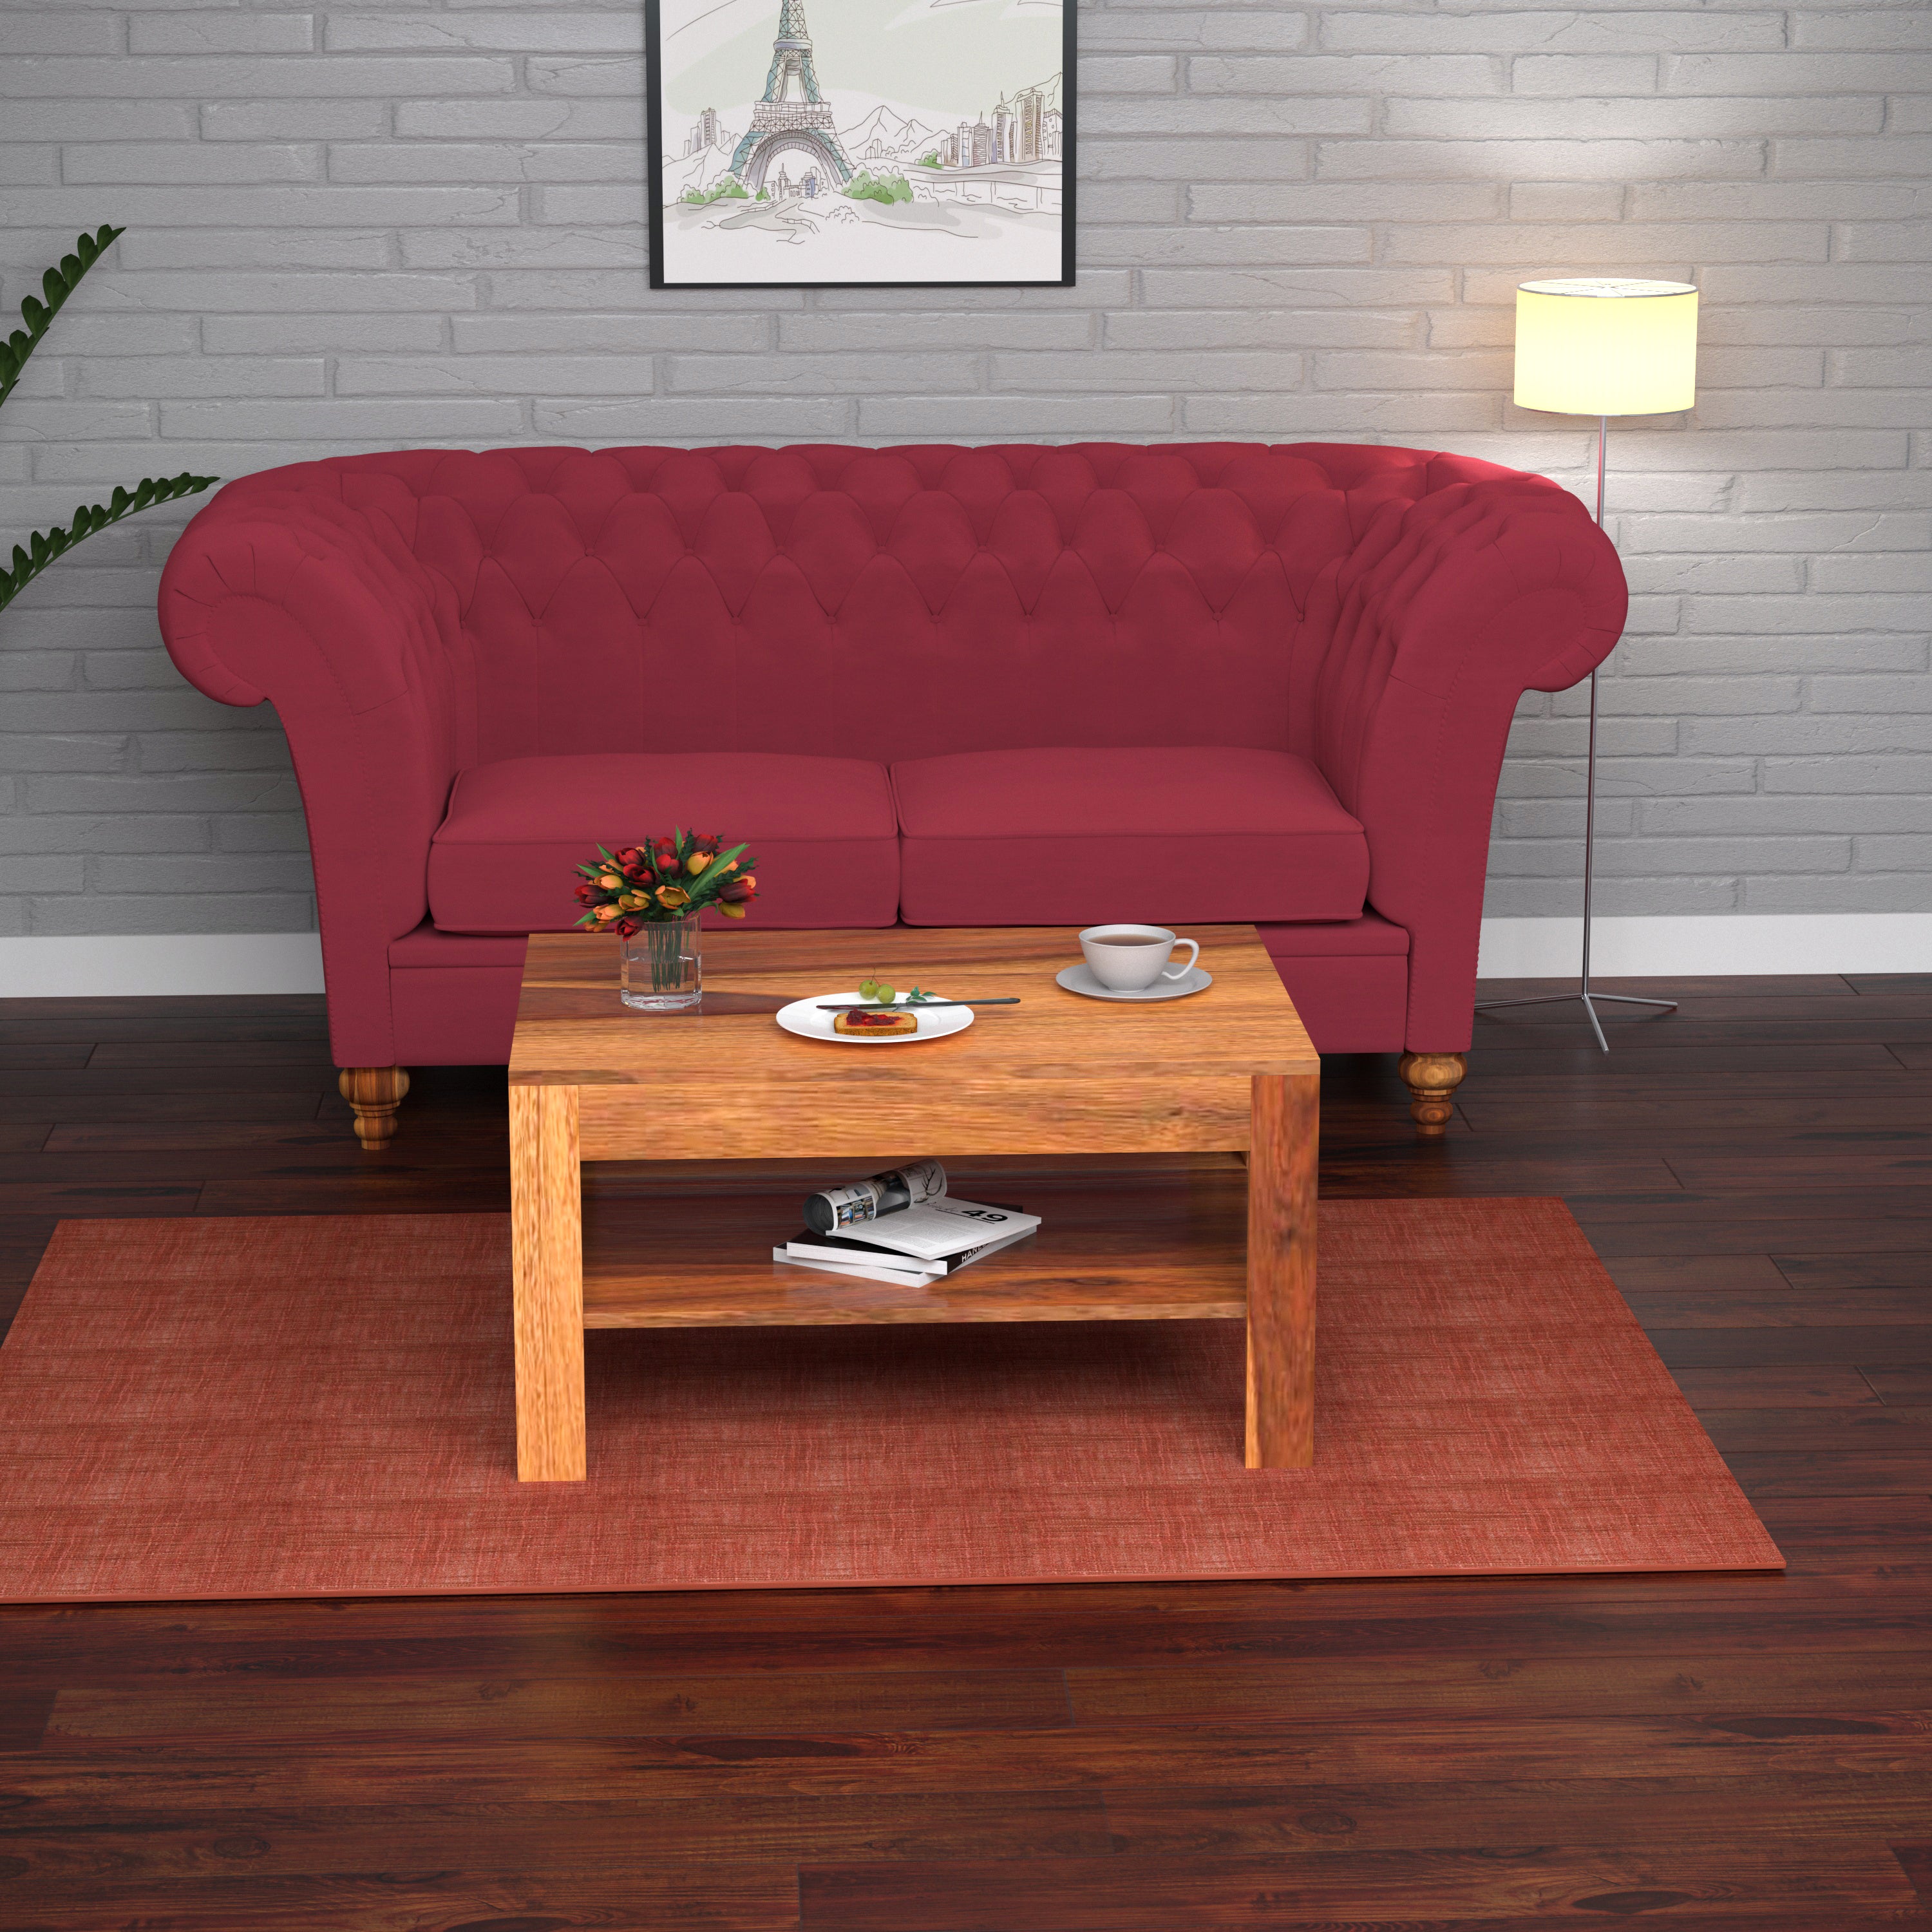 Burdeos Red Pastel Coloured Comfort Large 2 Seater Sofa + Center Table for Home Sofa